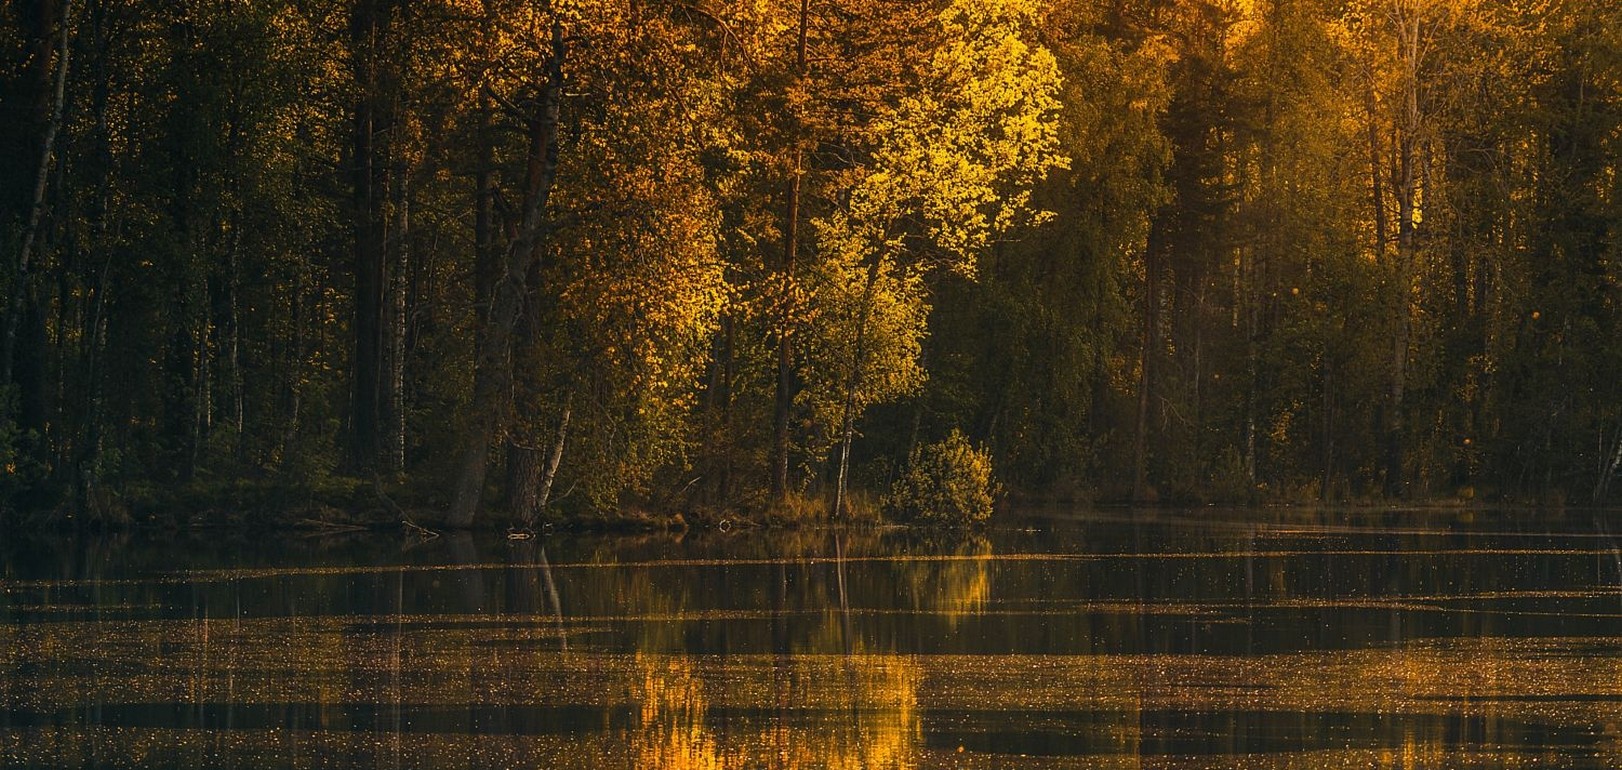 photography, Landscape, Nature, Lake, Forest, Fall, Trees, Reflection, Calm waters, Sunset, Yellow, Leaves Wallpaper